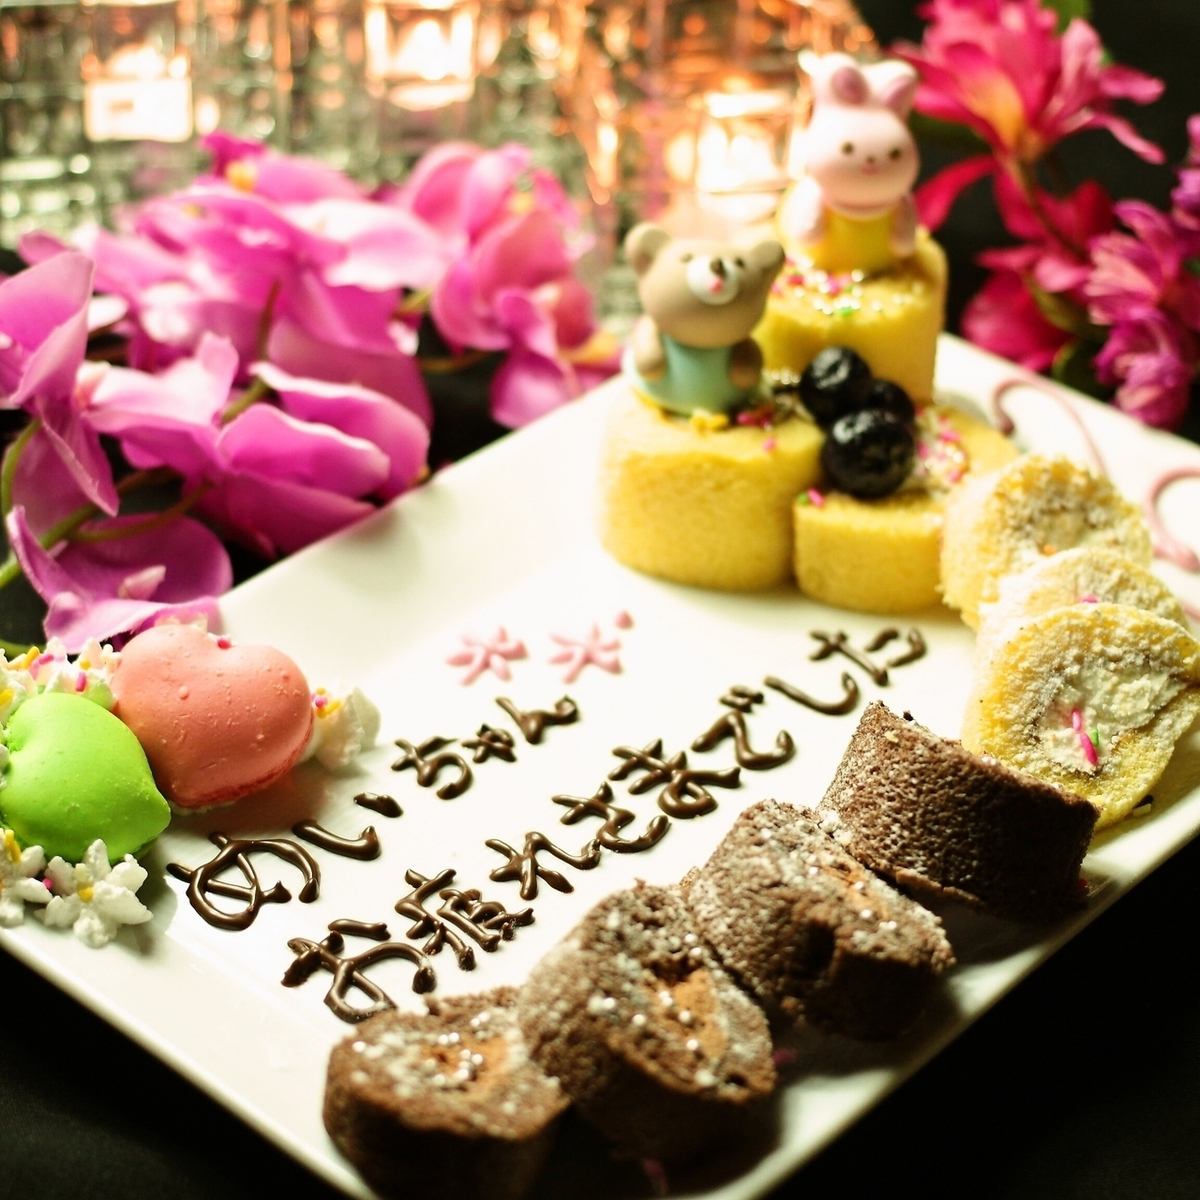 We will give you a free special dessert plate on your anniversary! New opening at Tenjin Station ♪